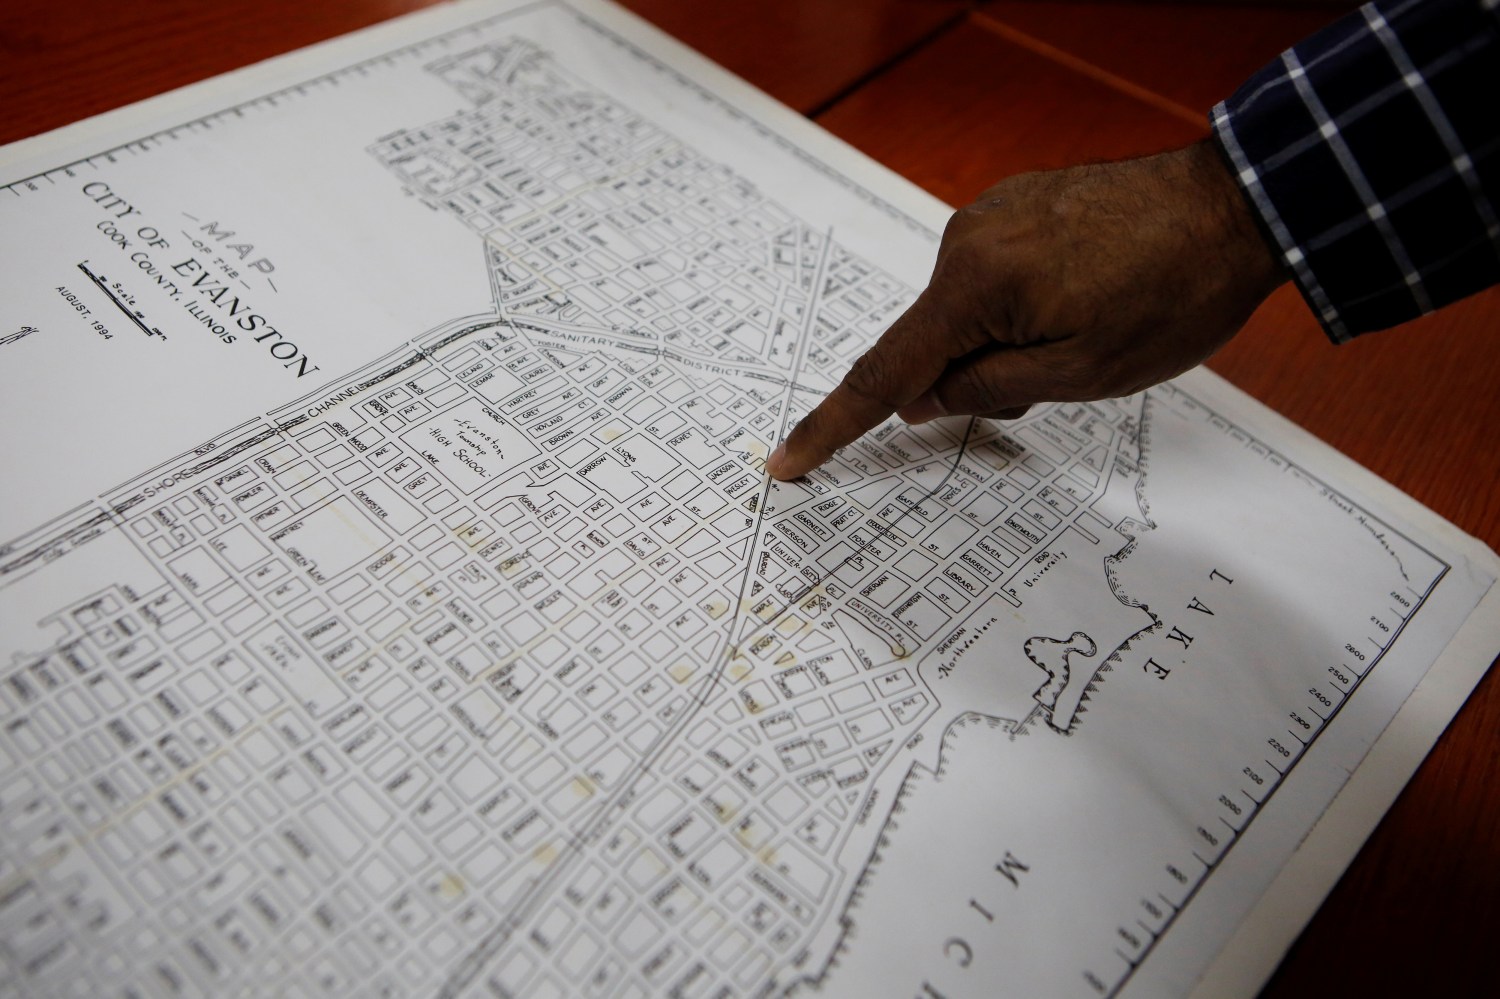 Community historian Morris “Dino” Robinson, who helped shape the Evanston’s reparations initiative, points to the borders of the Fifth Ward, which was the area of Evanston the city’s Black citizens were forced to move to due to redlining between 1919 and 1969, in Evanston, Illinois, U.S March 17, 2021. REUTERS/Eileen T. Meslar